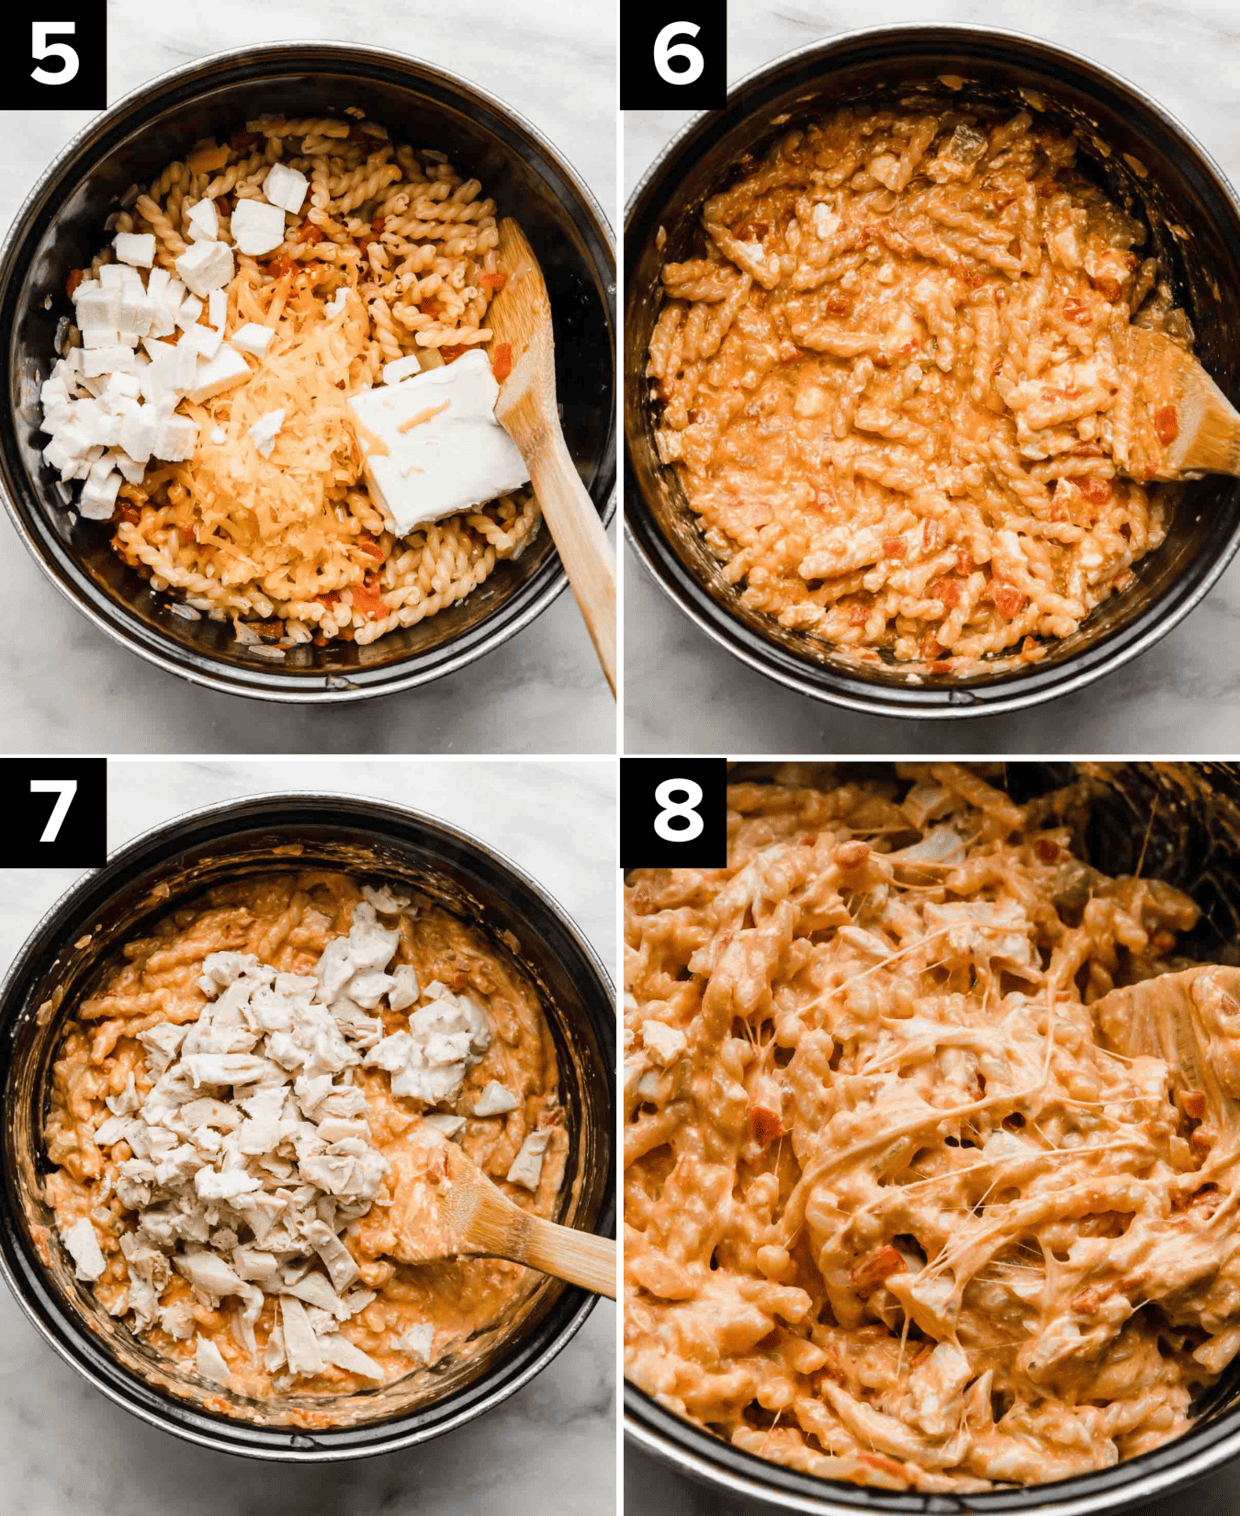 Four images showing how to make Buffalo Chicken Pasta, all images are a black pot with ingredients being added to the pot such as cream cheese, cheese, chicken, and then stirring together to combine.